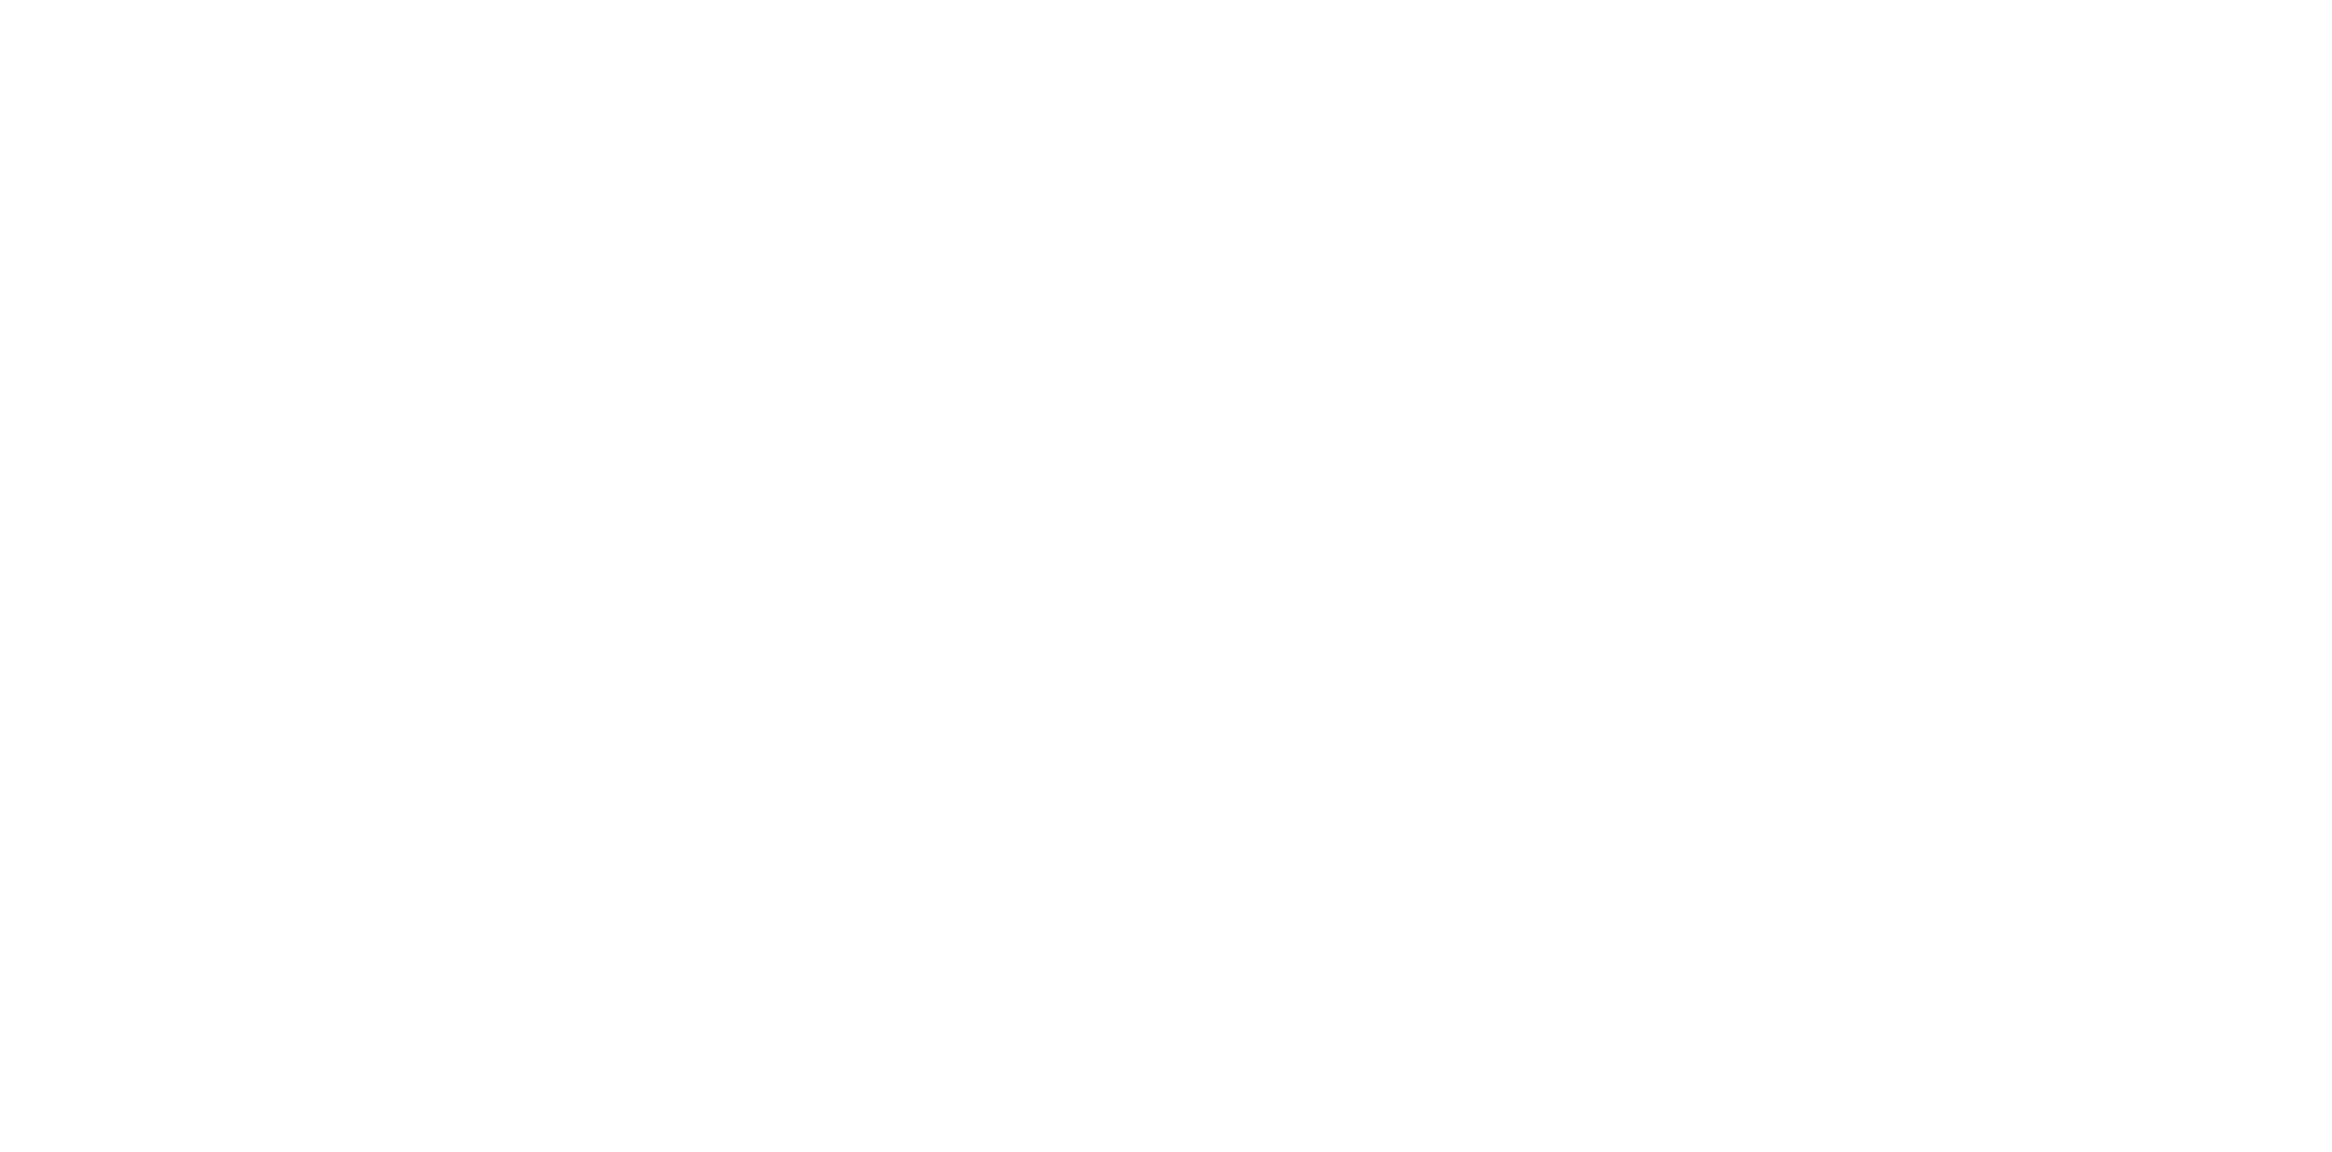 Doomed to Succeed